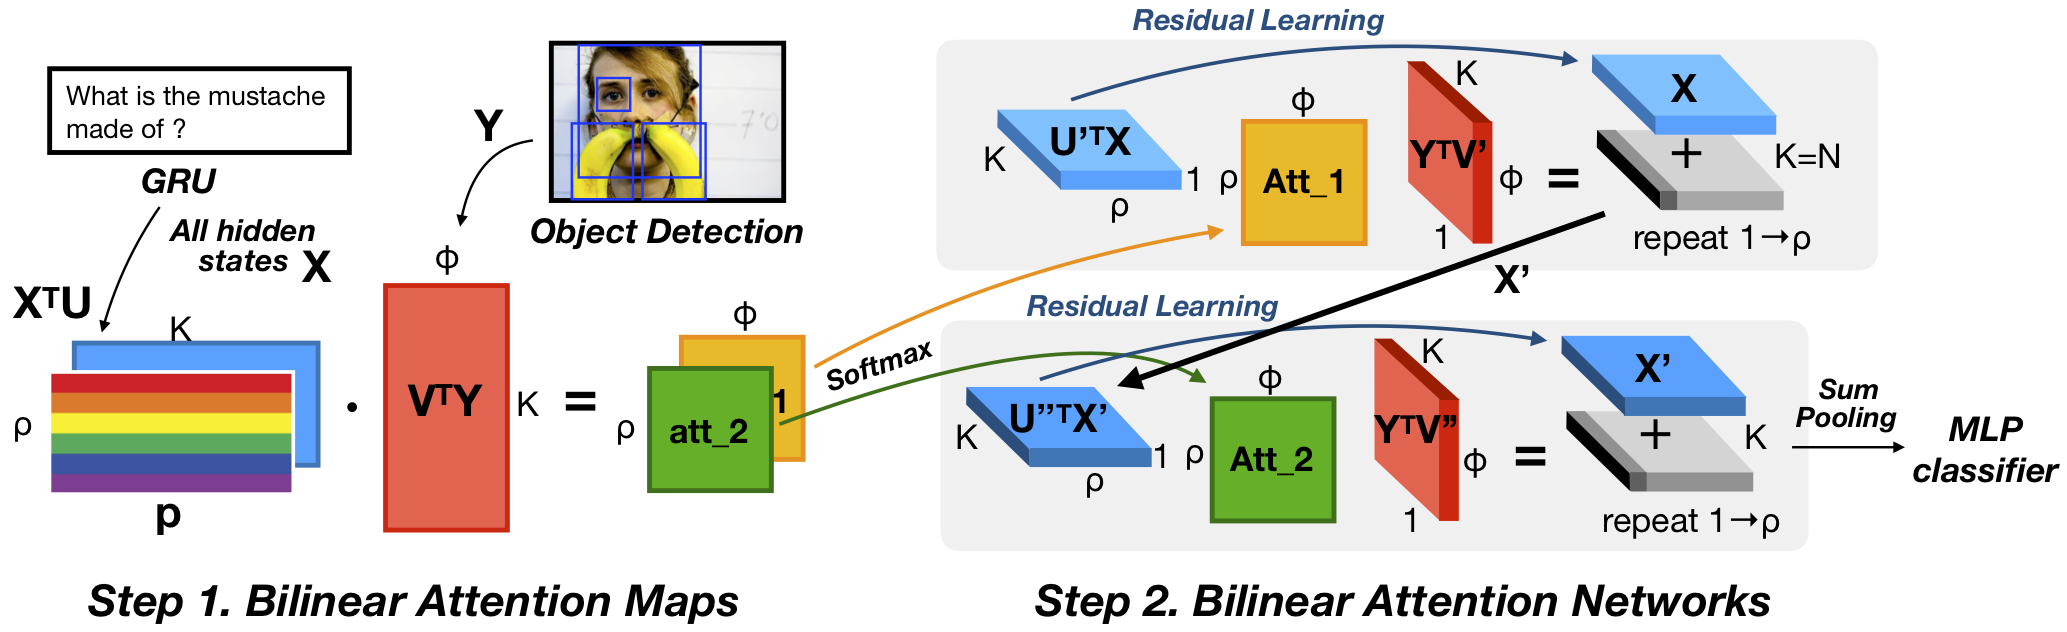 Overview of bilinear attention networks